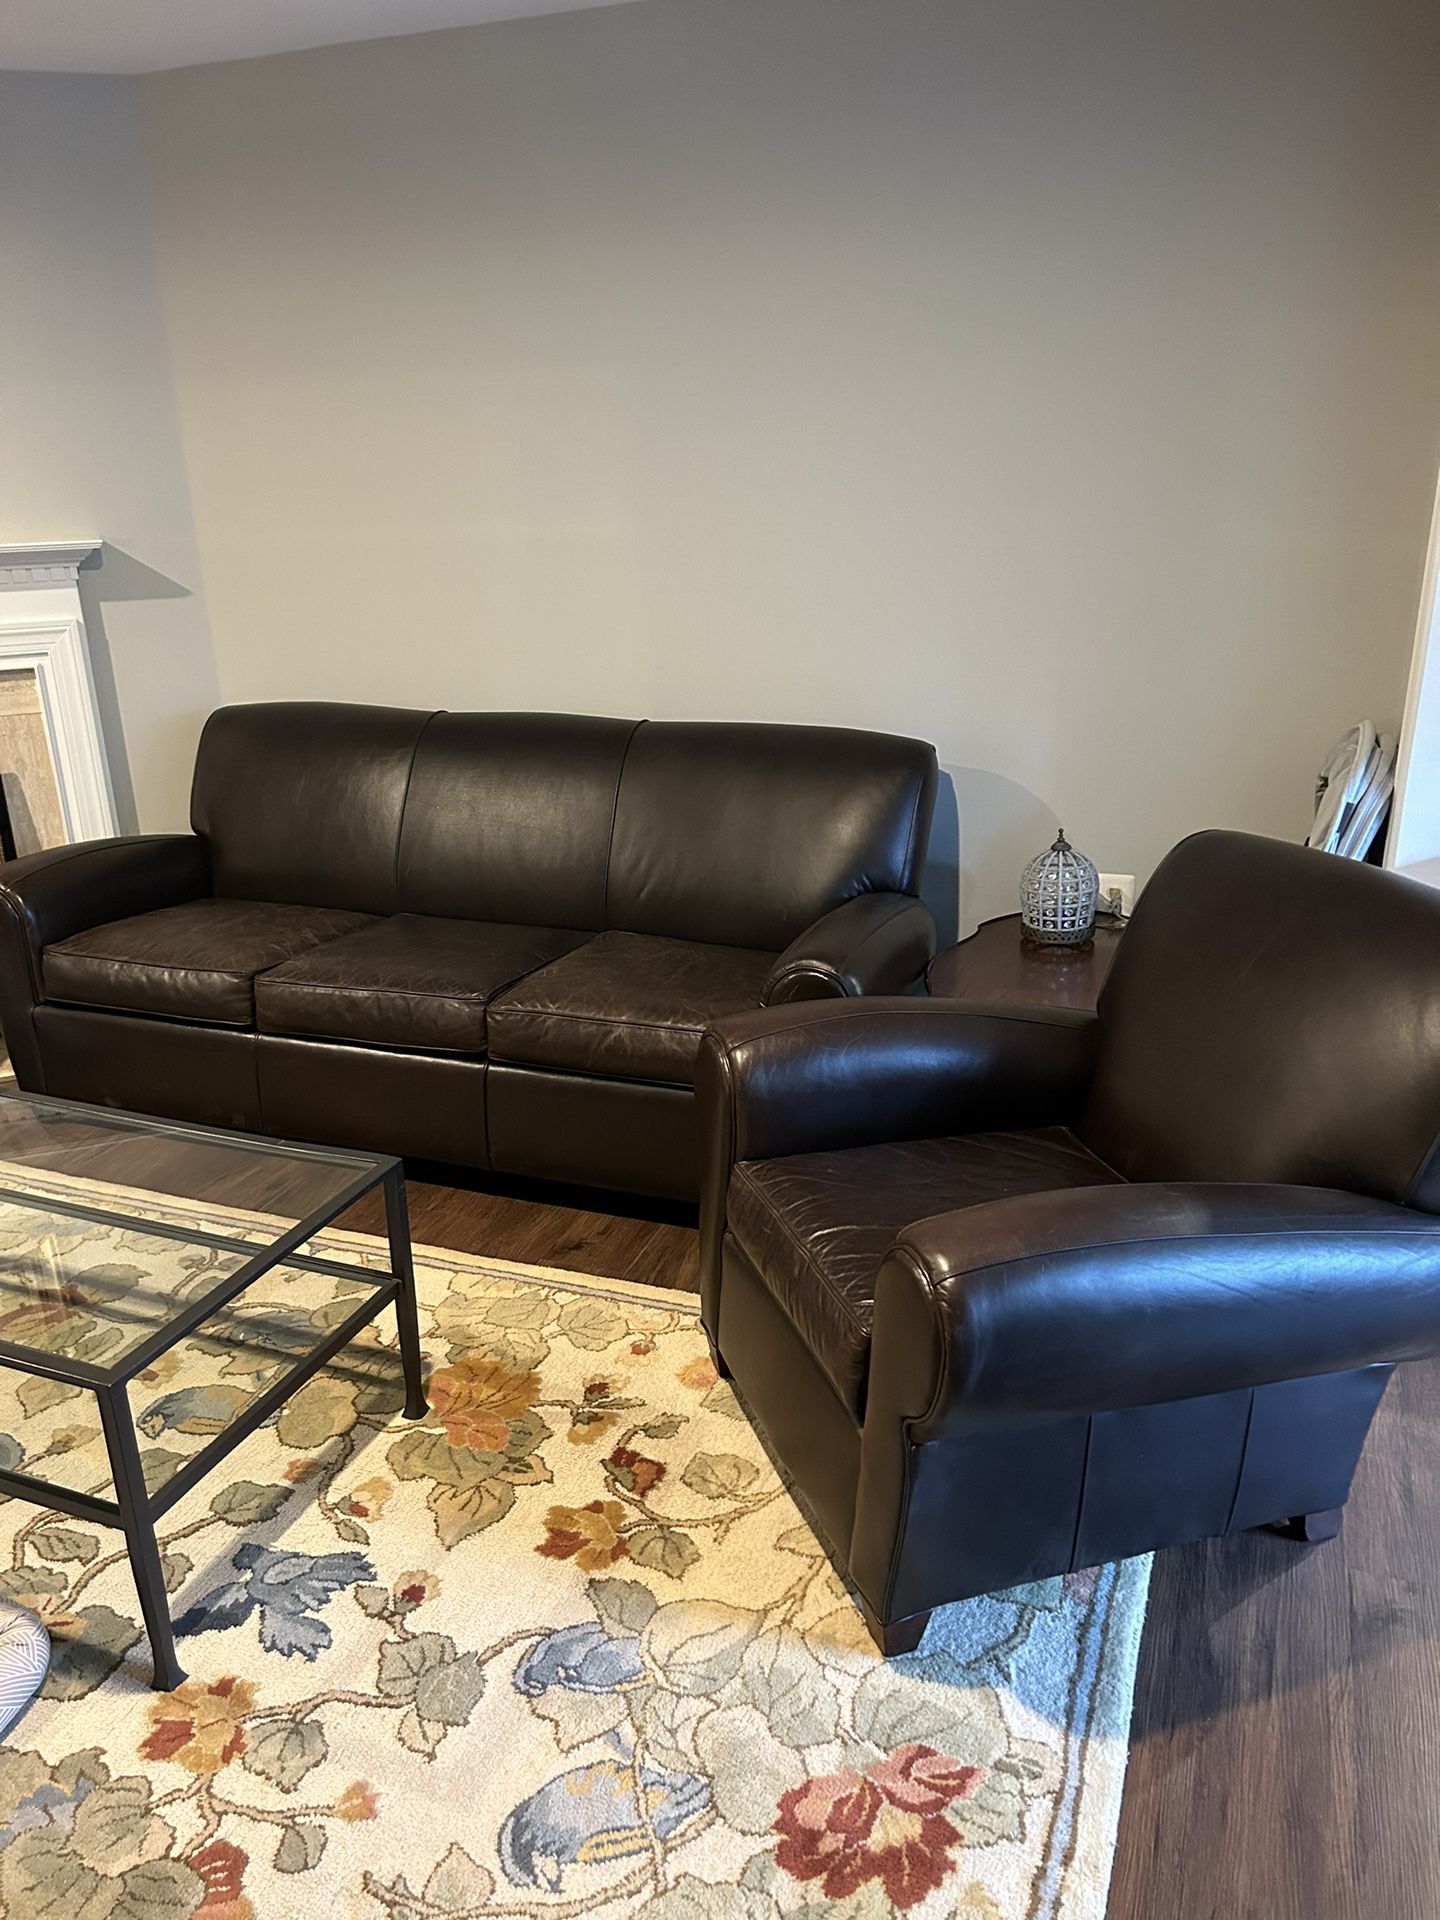 Pottery barn Leather Couch Plus Chair